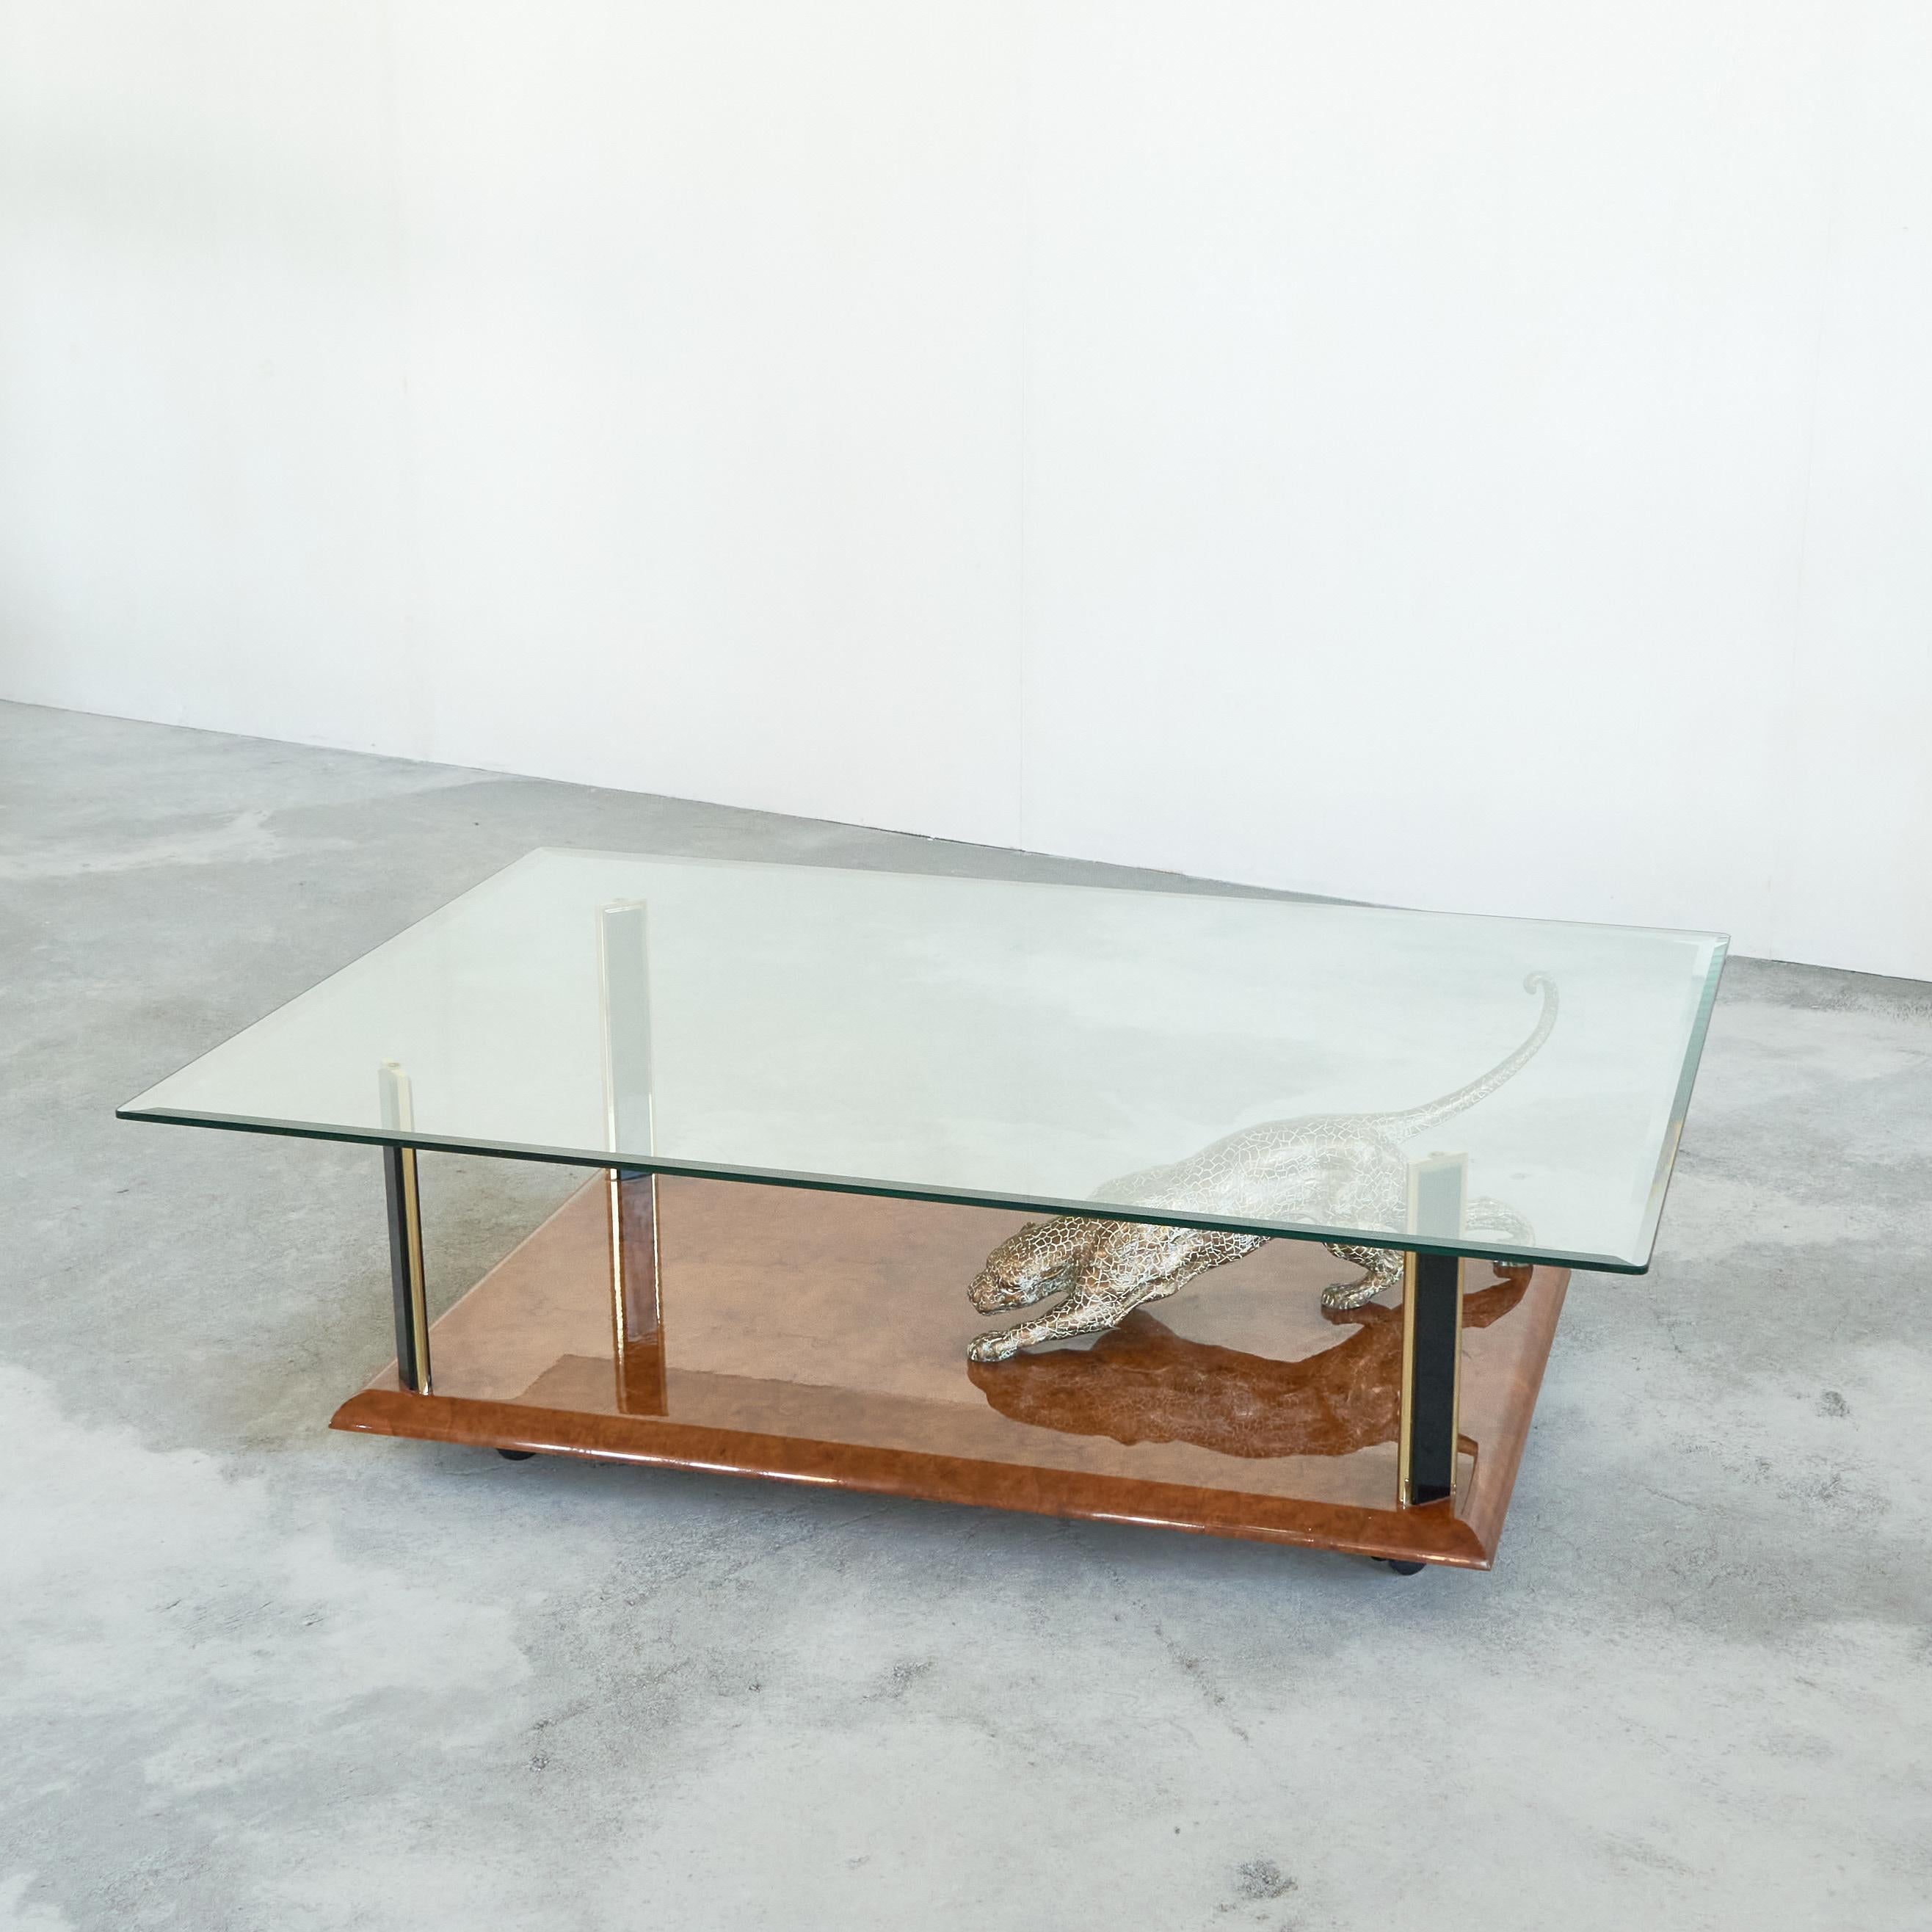 Nicola Voci 'Jaguar' Coffee Table in Bronze, Burl Wood and Beveled Glass 1970s.

This is a spectacular and high-end coffee table by artist Nicola Voci, made from lacquered burl wood, patinated bronze, brass and beveled glass. It shows a leaping